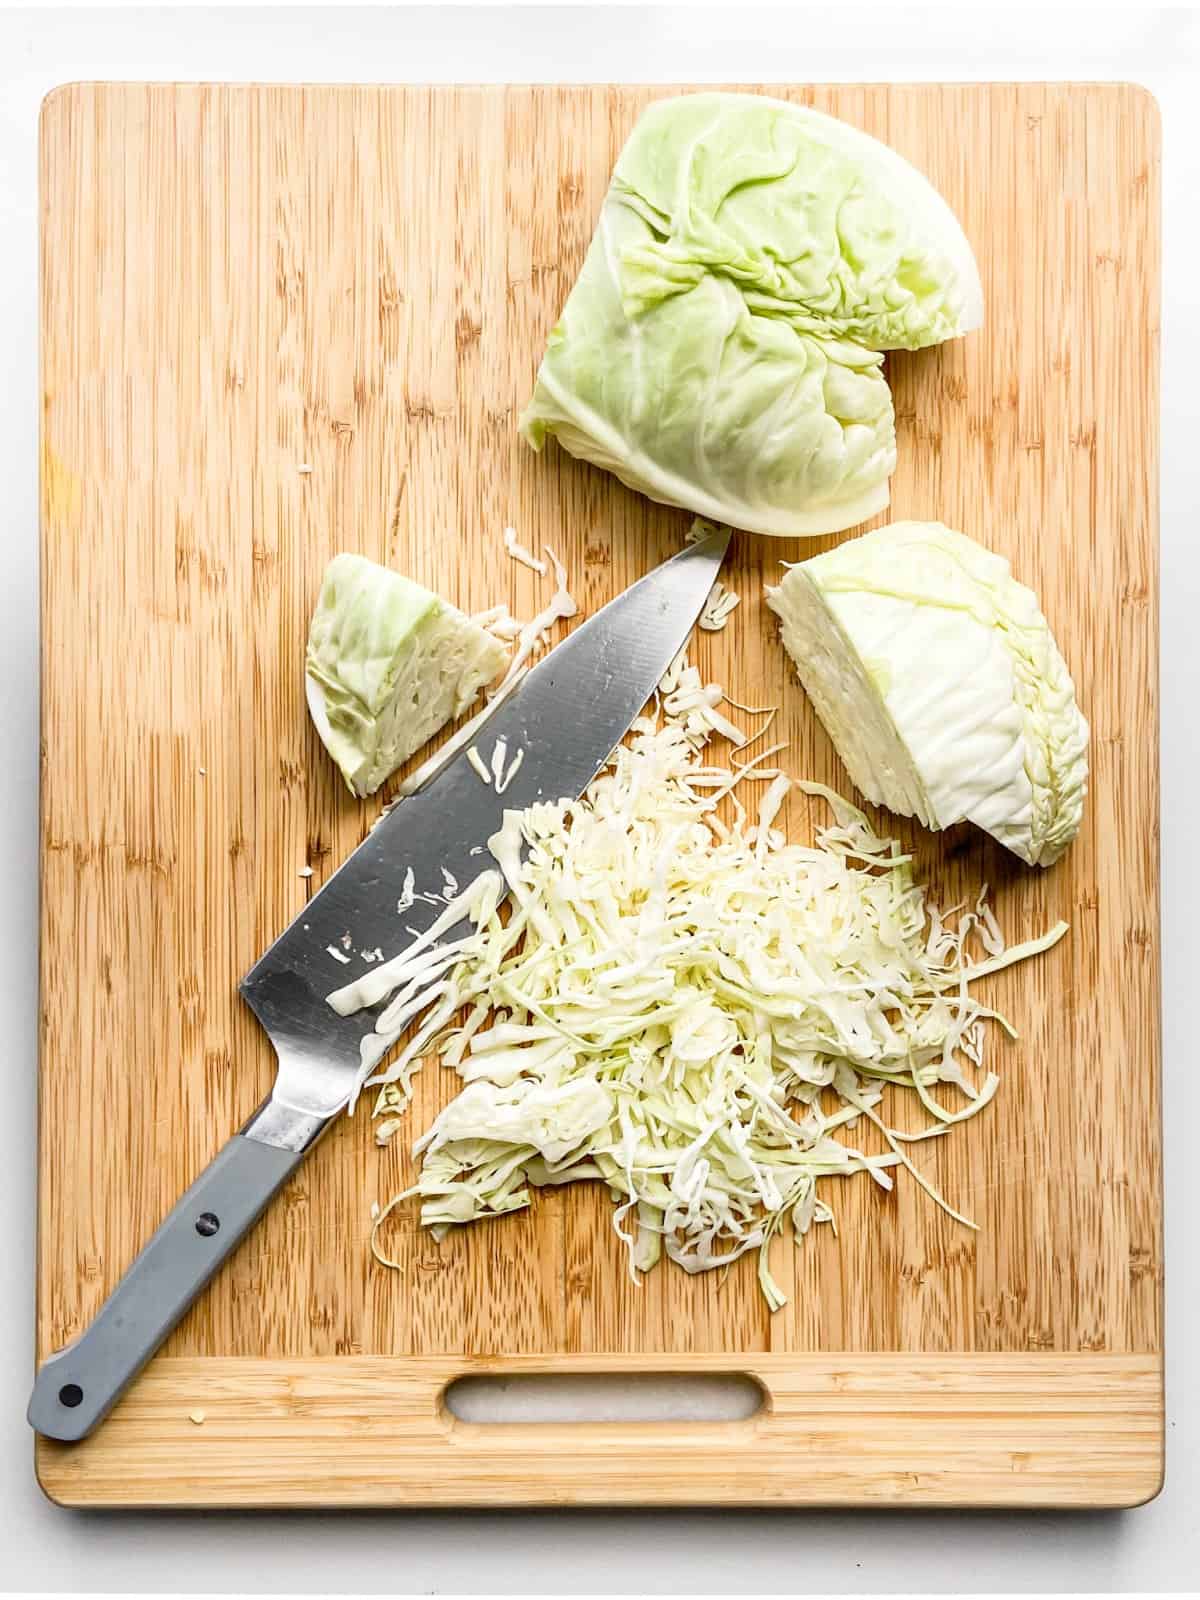 thinly sliced cabbage on a chopping board